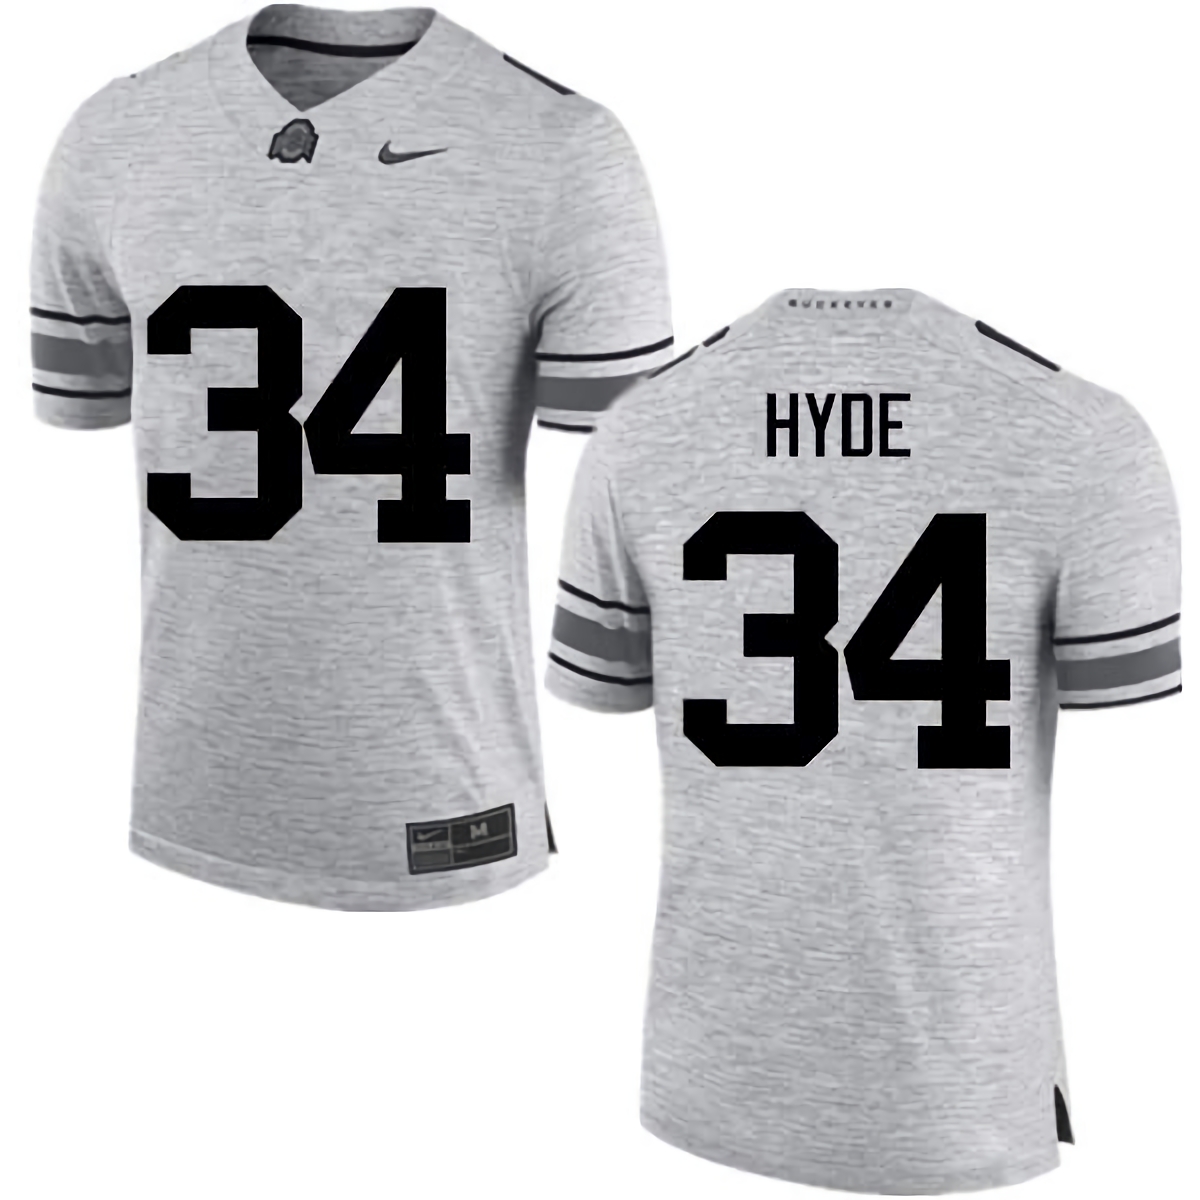 Carlos Hyde Ohio State Buckeyes Men's NCAA #34 Nike Gray College Stitched Football Jersey NRP2256IX